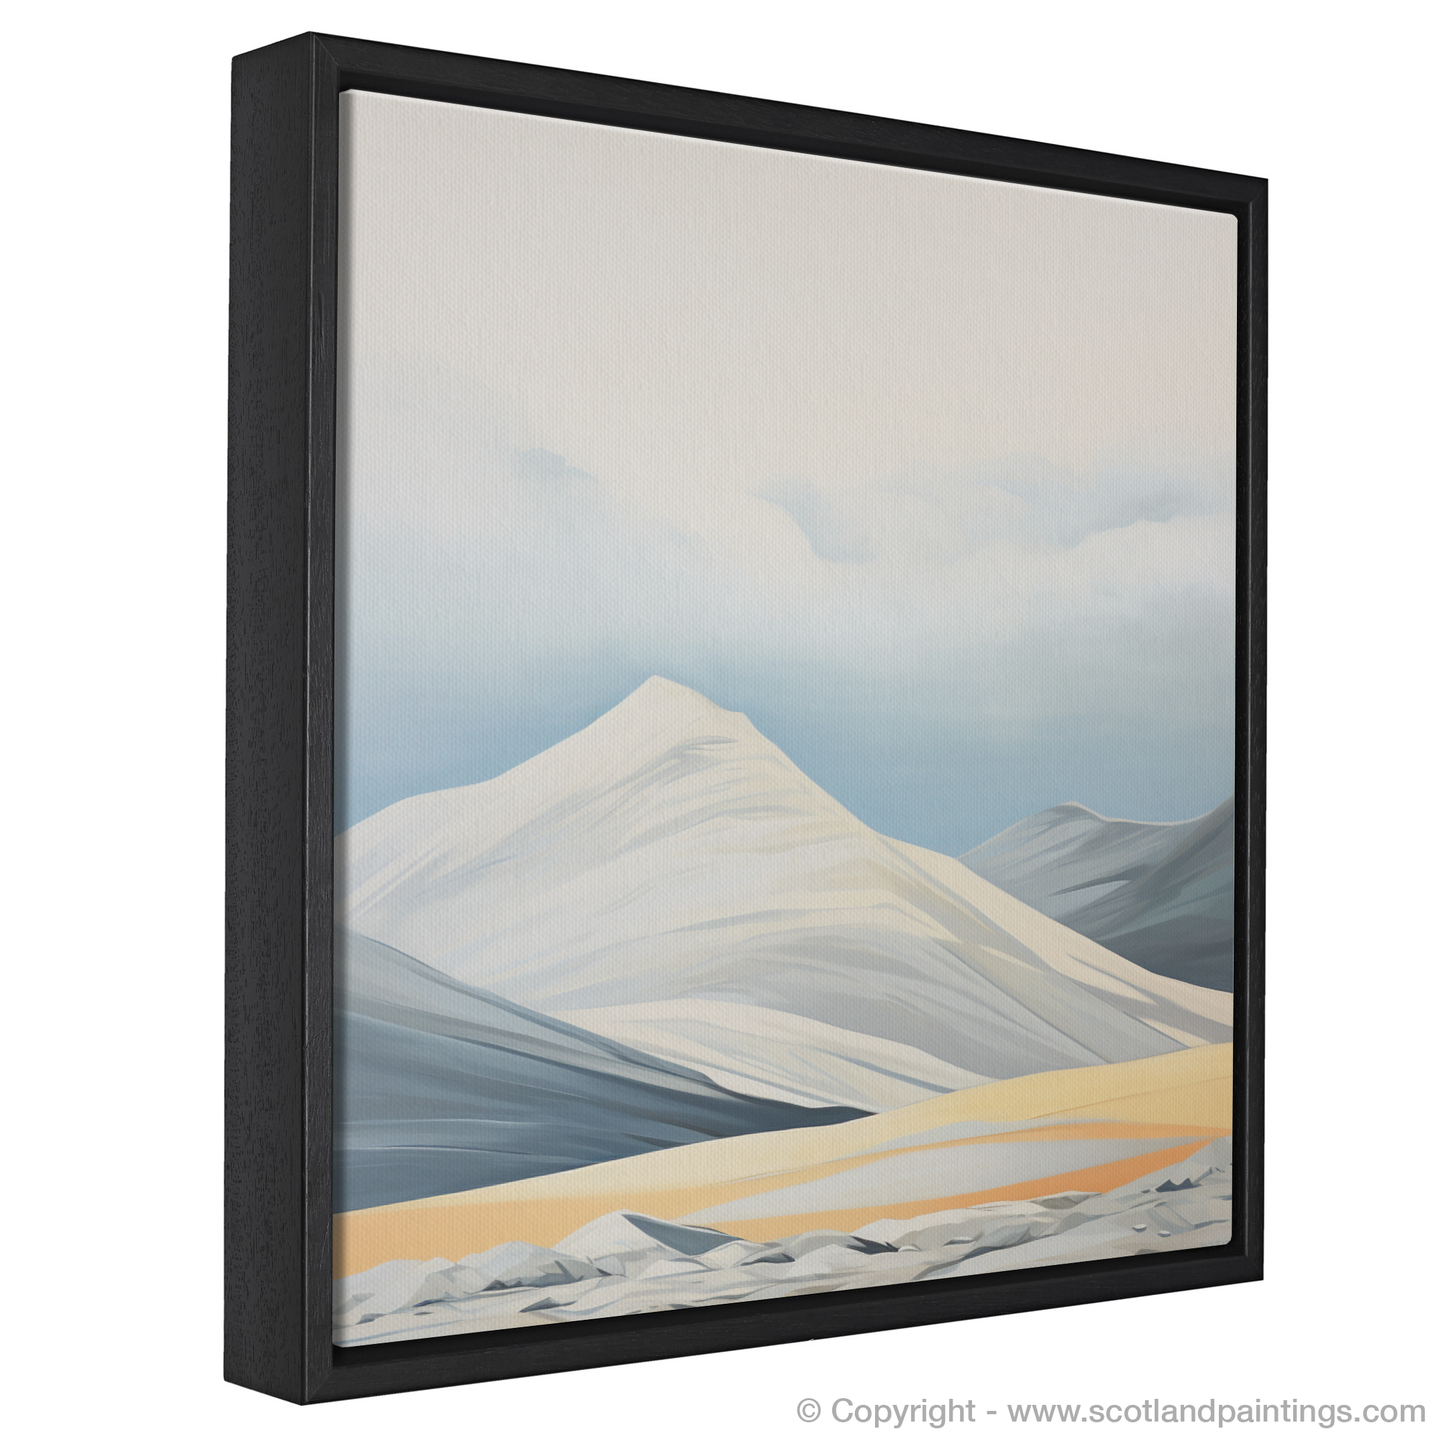 Painting and Art Print of Ben Lawers entitled "Majestic Ben Lawers: An Abstract Homage".